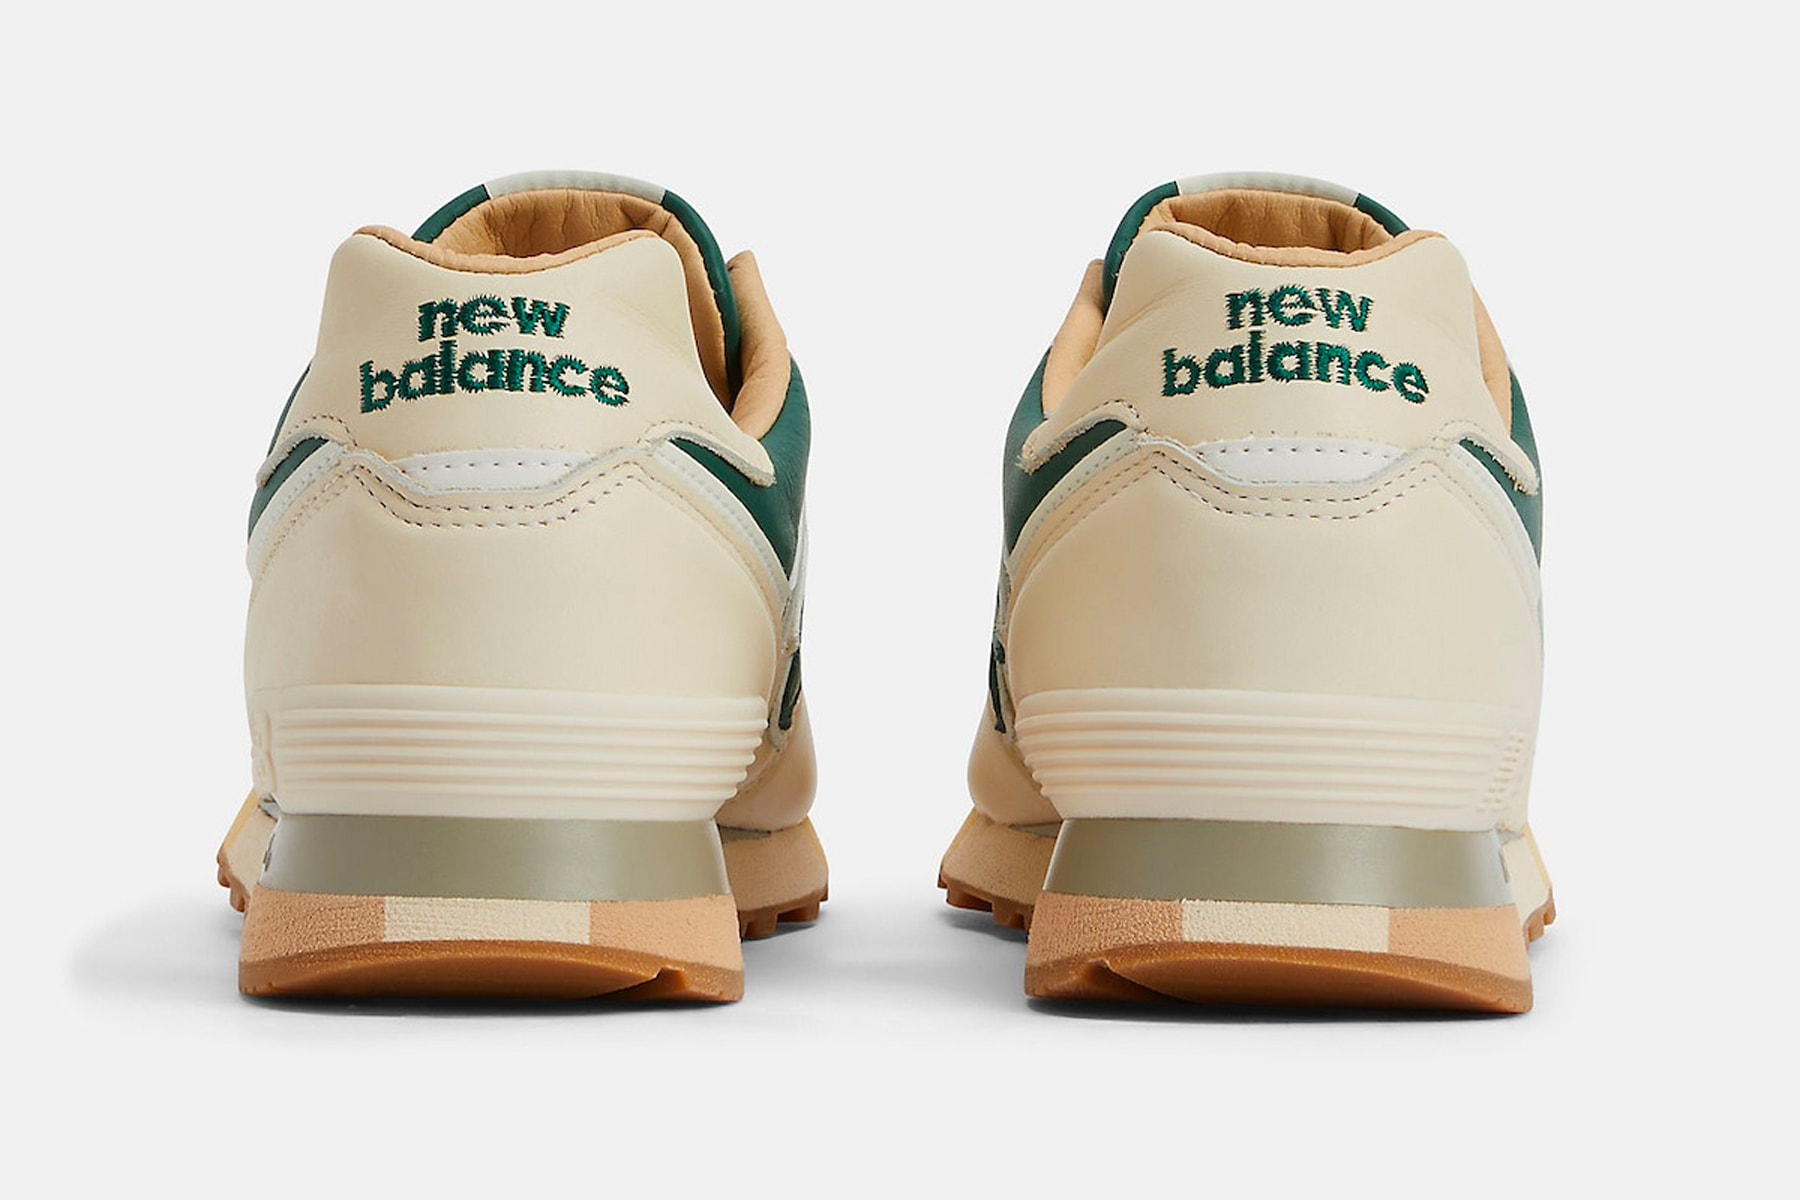 the Apartment x New Balance 576 Made in UK 全新聯名鞋款台灣發售情報公開